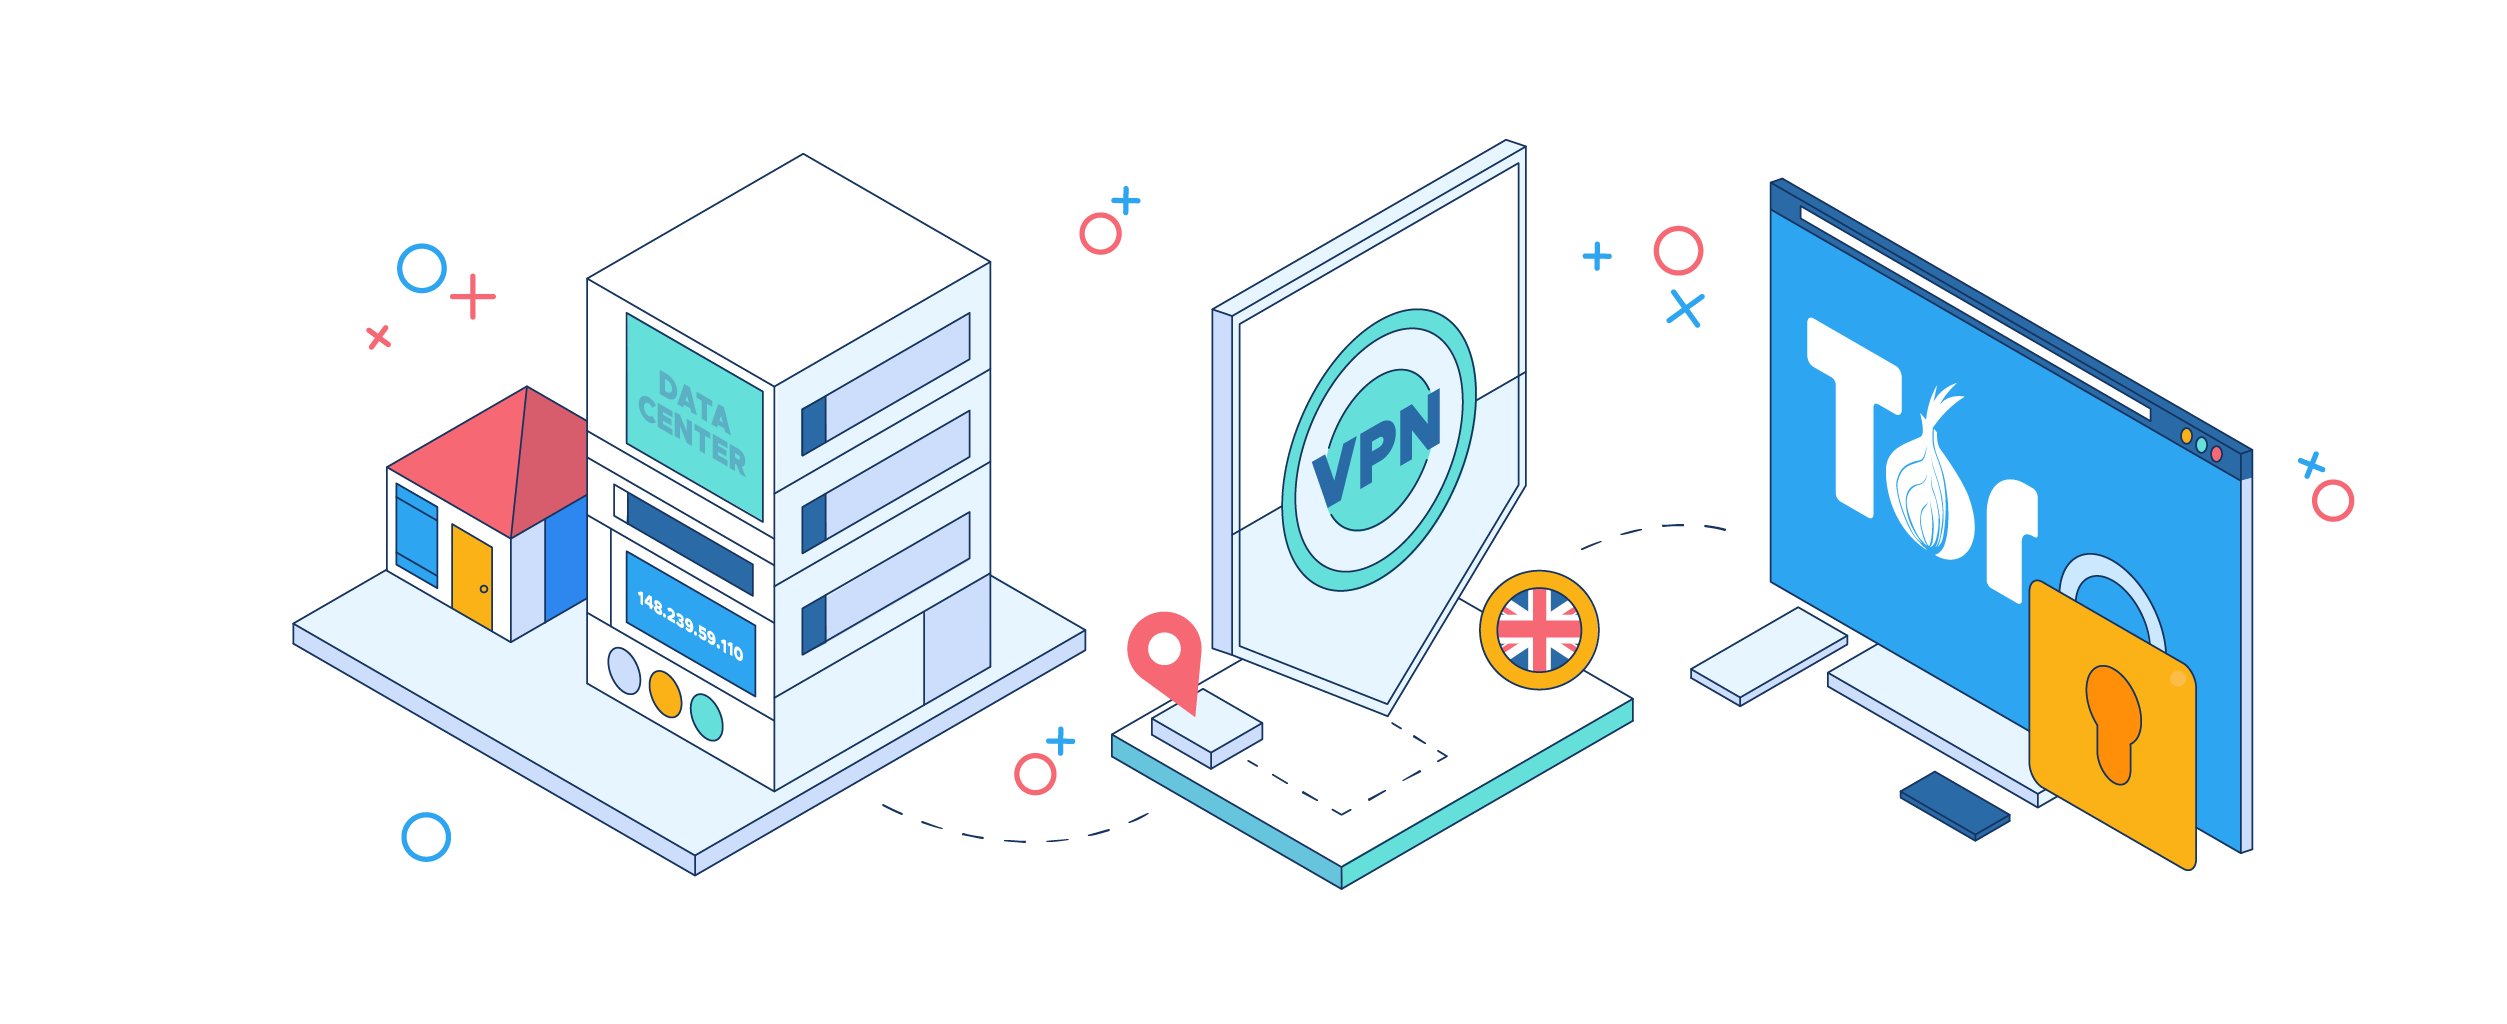 Proxy vs VPN: What are the main differences?